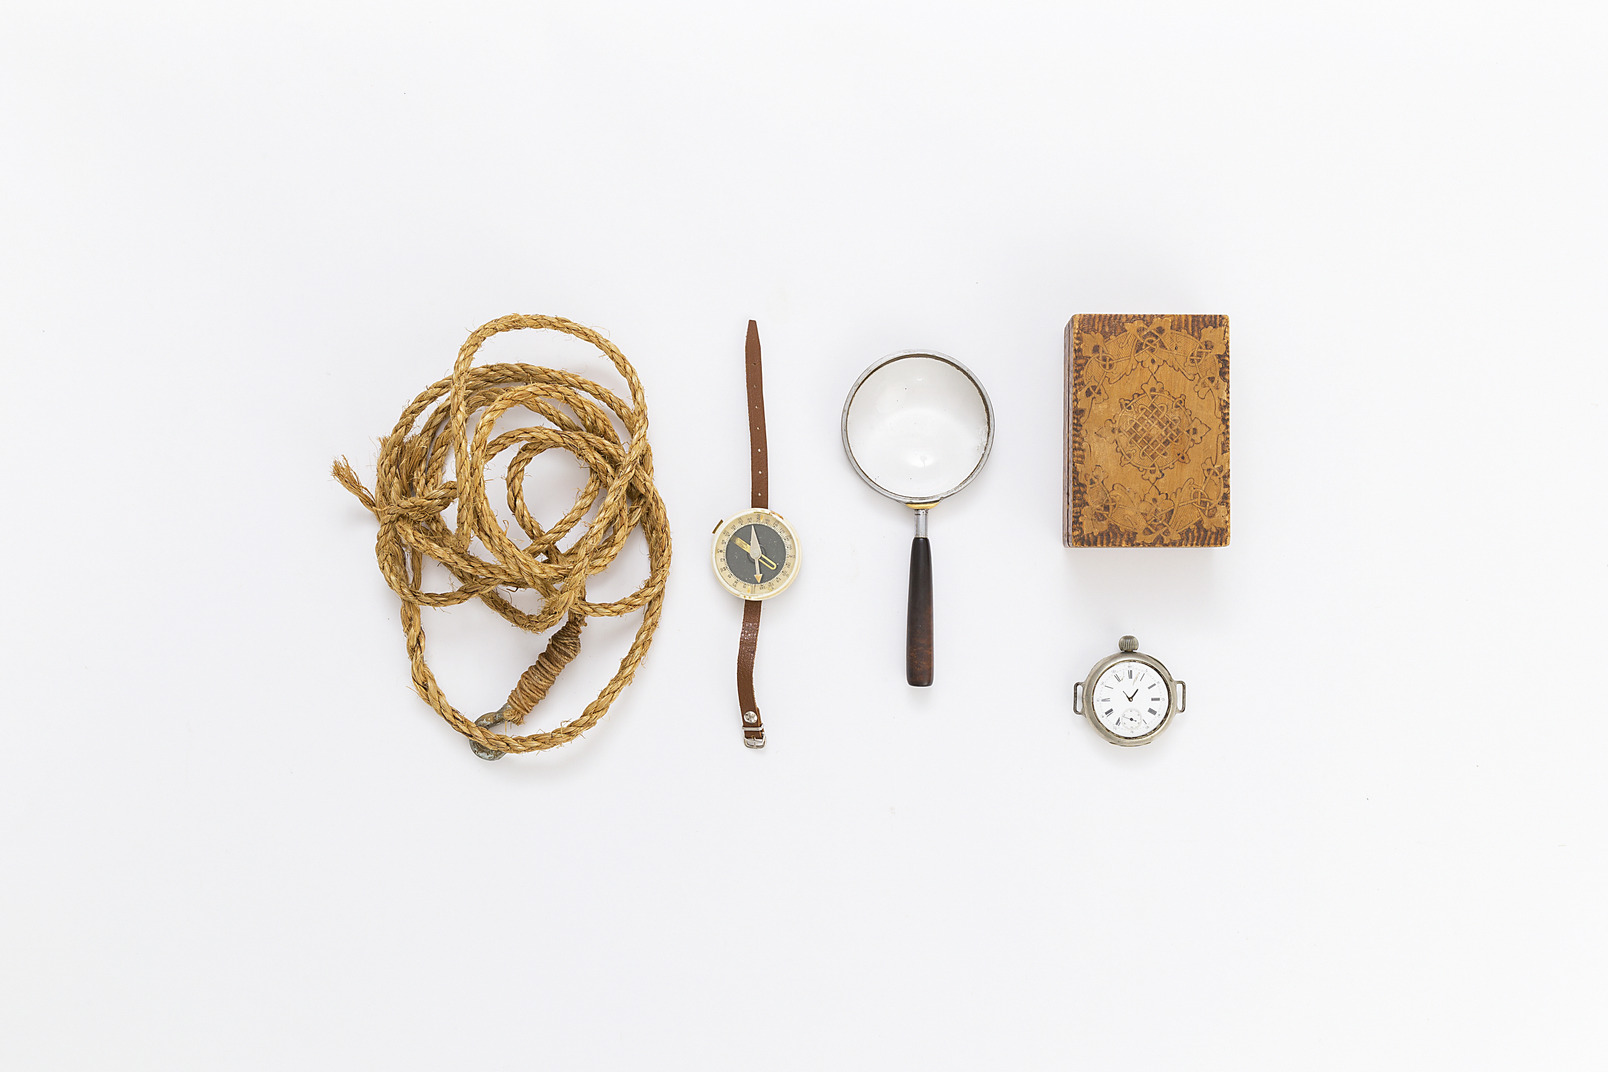 Rope with hook, pocket watch, magnifying glass, vintage box and compass